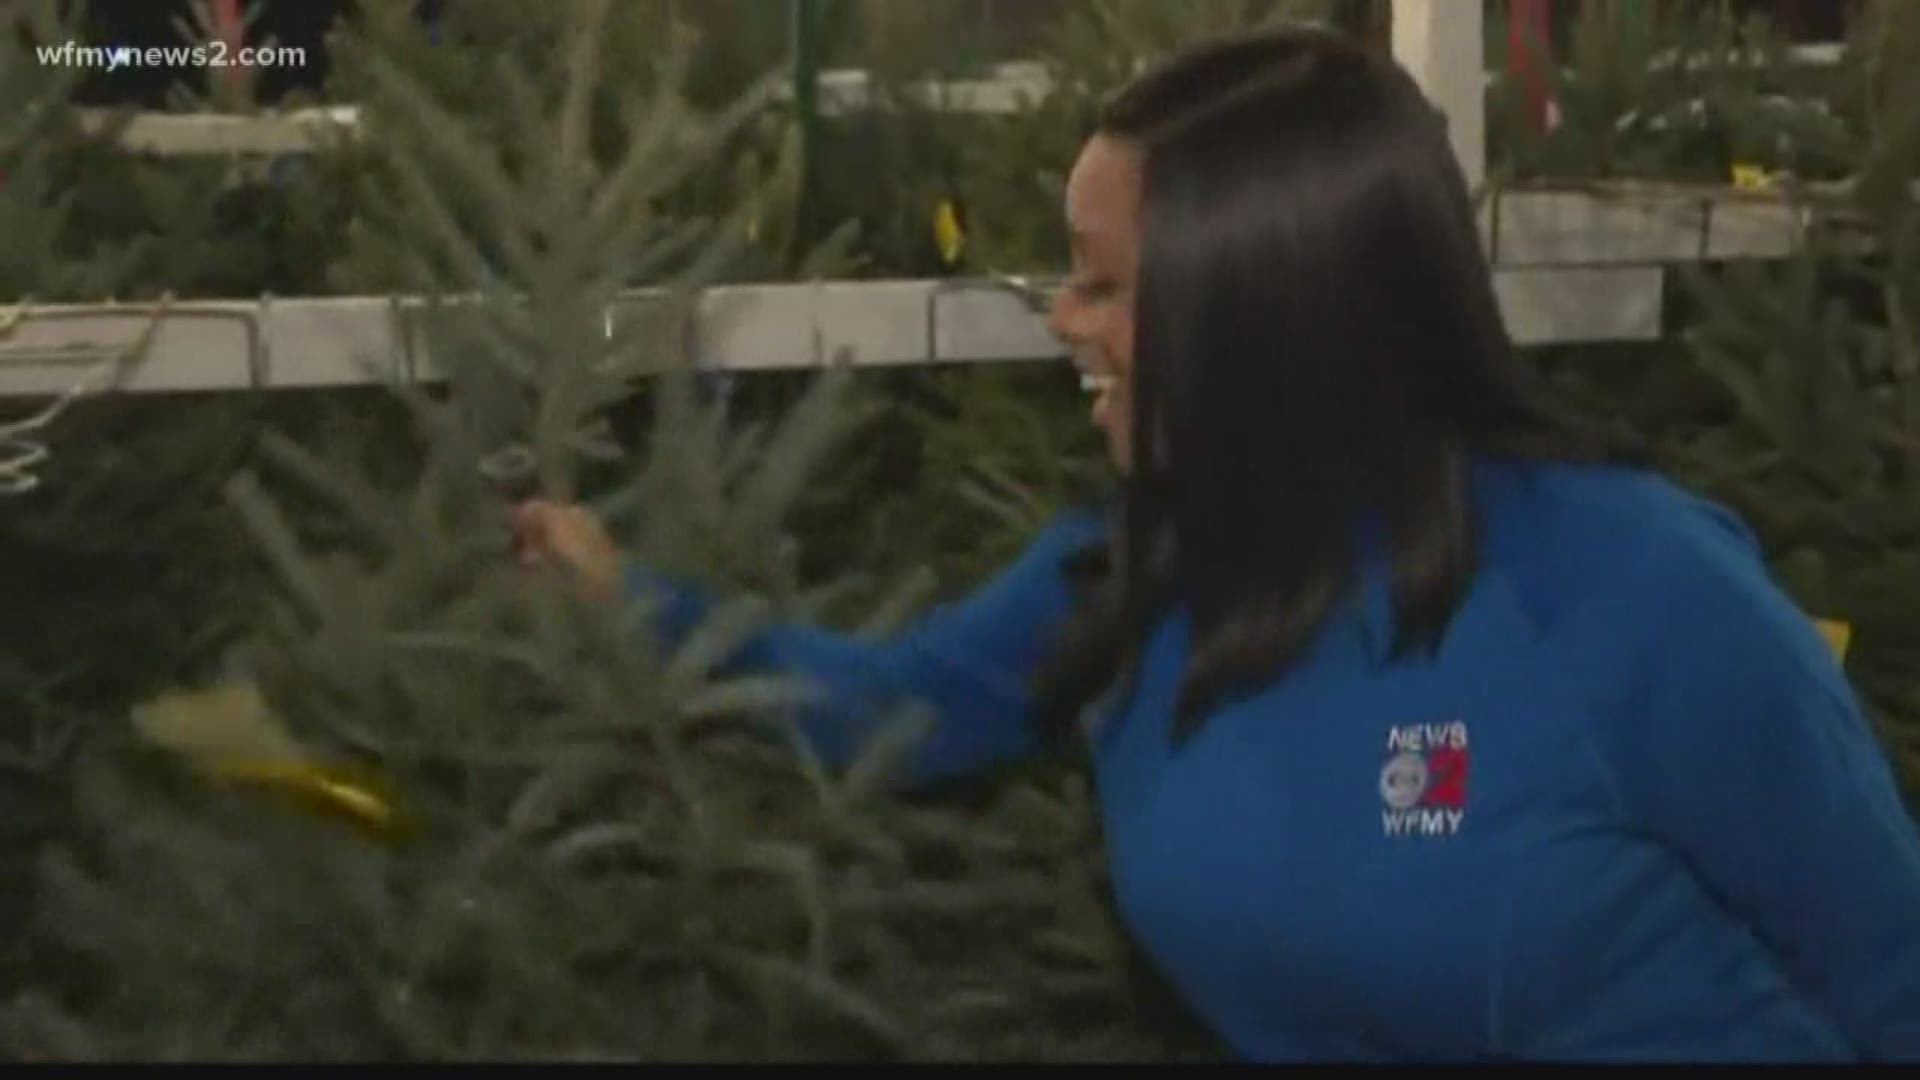 Safer Brand says there could be up to 25,000 bugs in one Christmas tree.